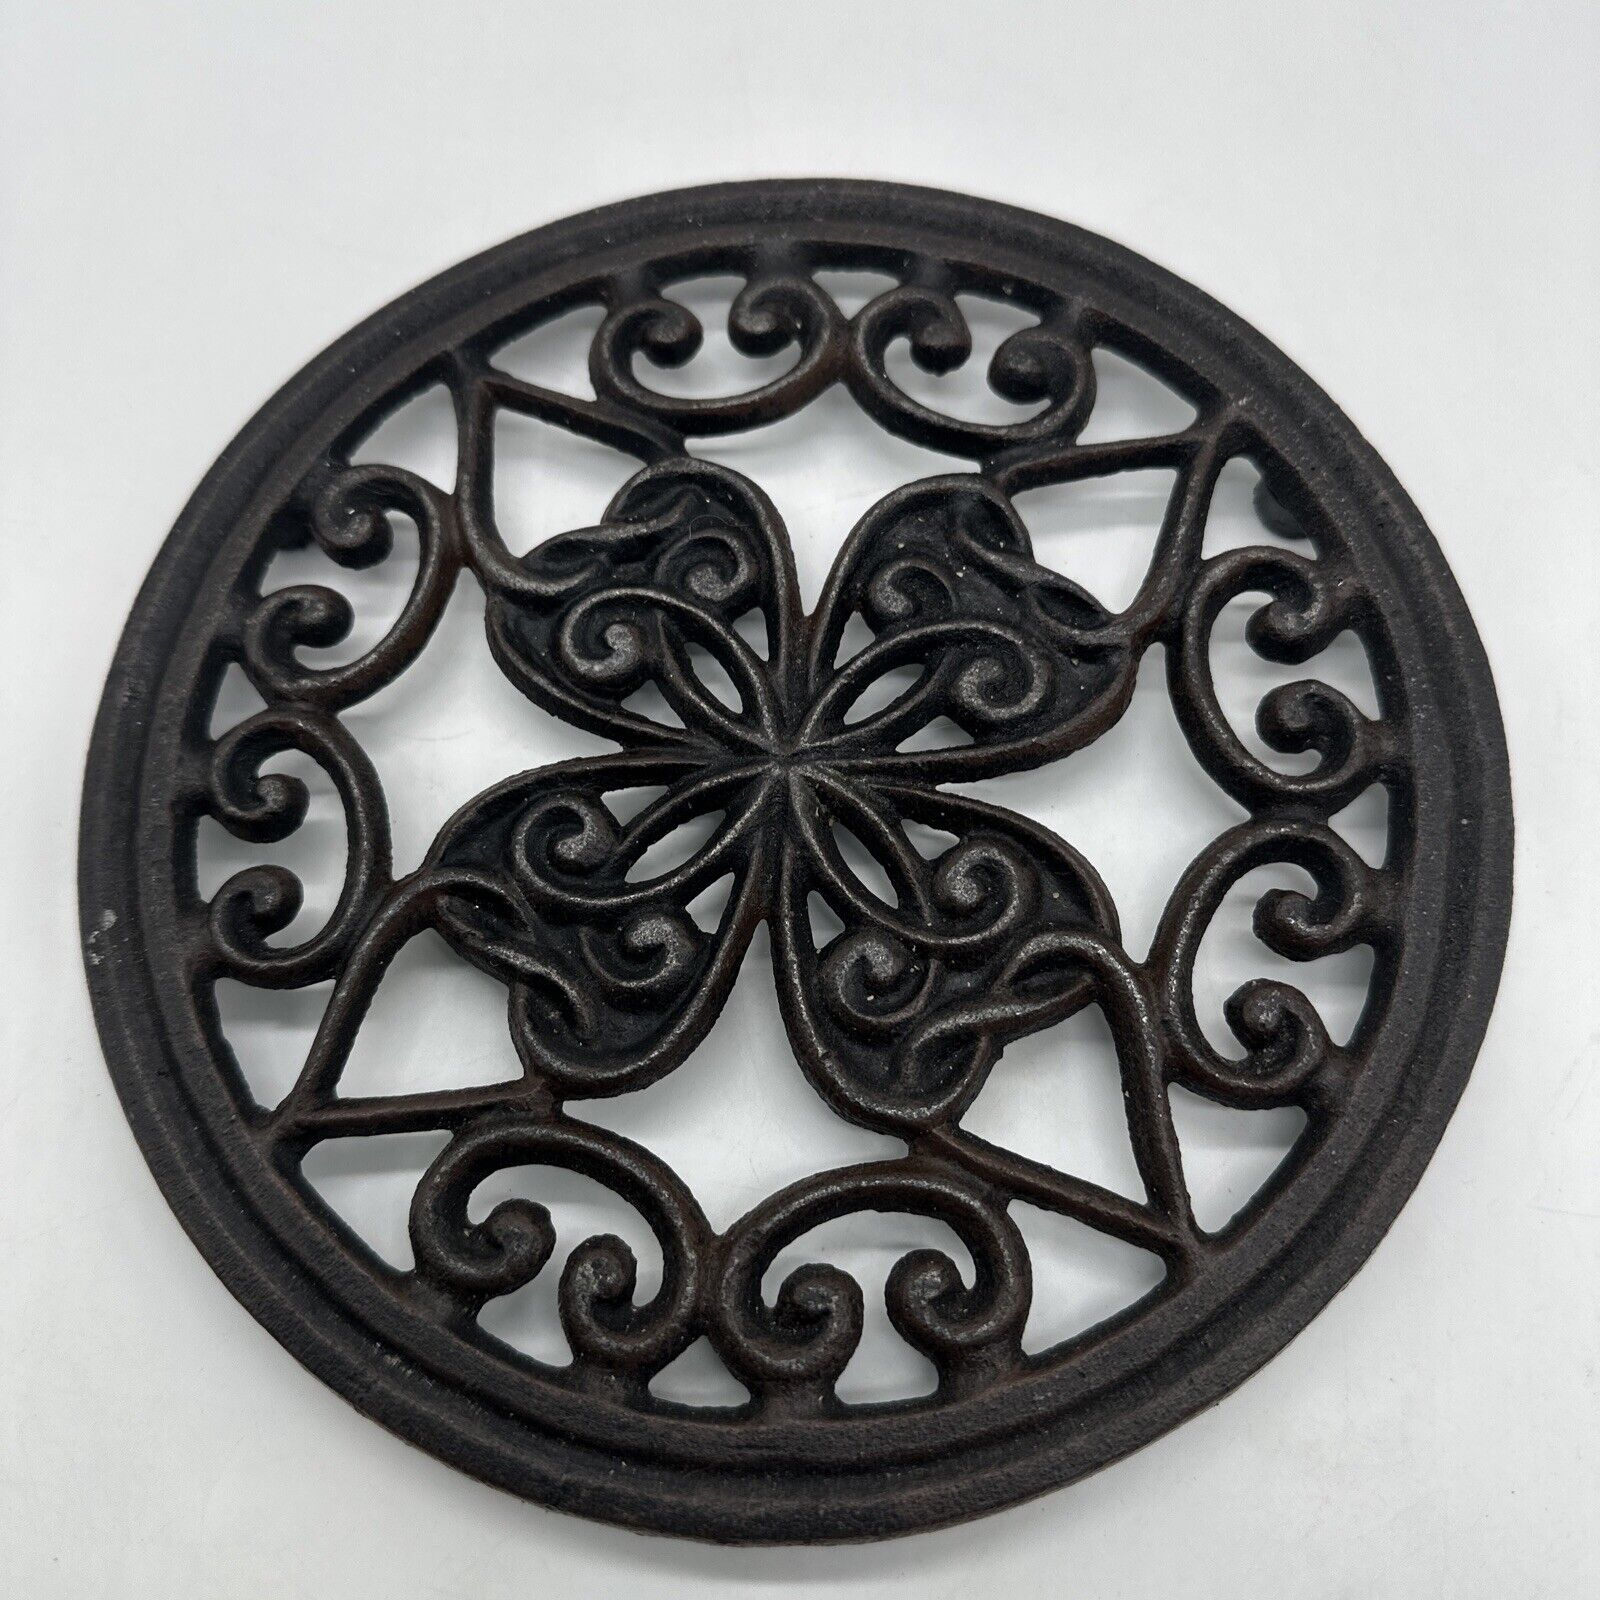 Decorative Vintage Cast Iron Trivet With Intertwined Hearts